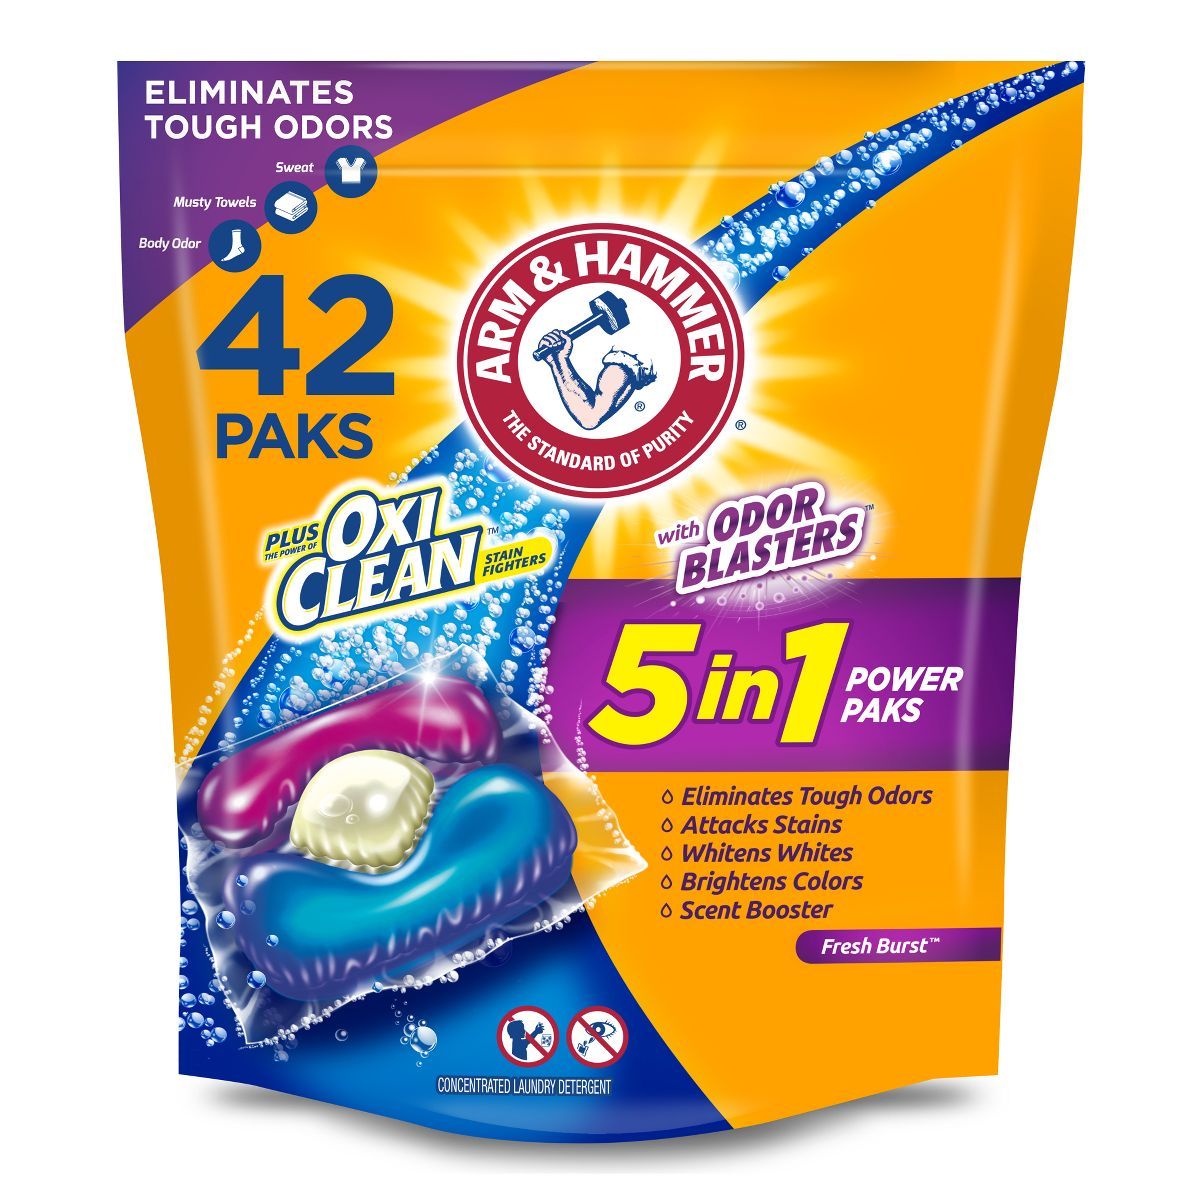 Arm & Hammer Plus OxiClean with Odor Blasters - 42ct/29.6oz | Target